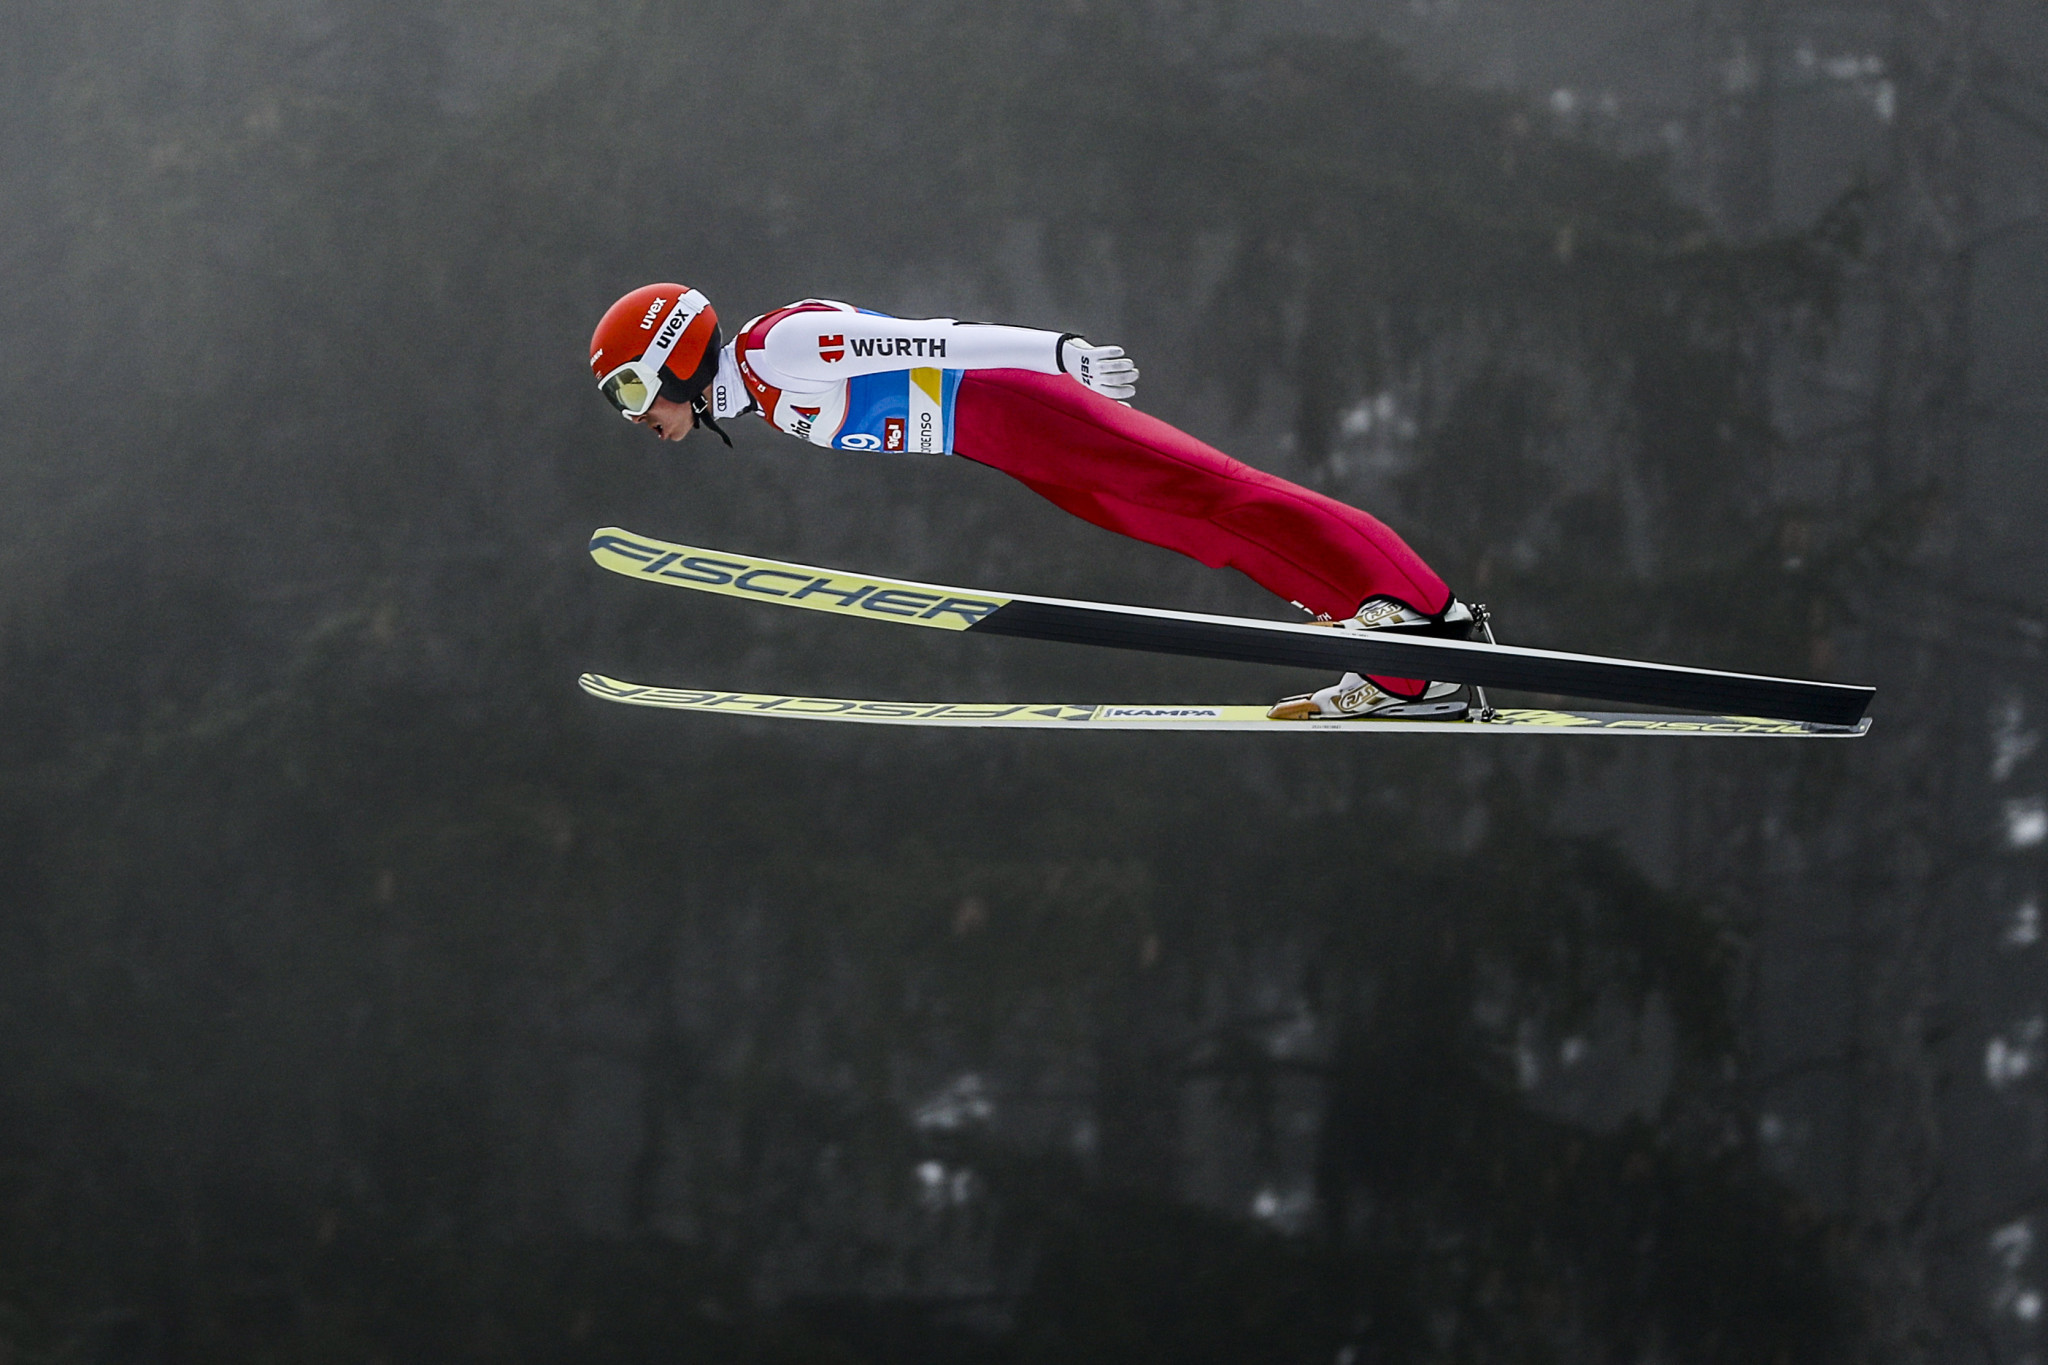 Frenzel achieved the highest score in the ski jumping to give him an advantage going into the cross-country in the Nordic combined individual 10km final ©Getty Images